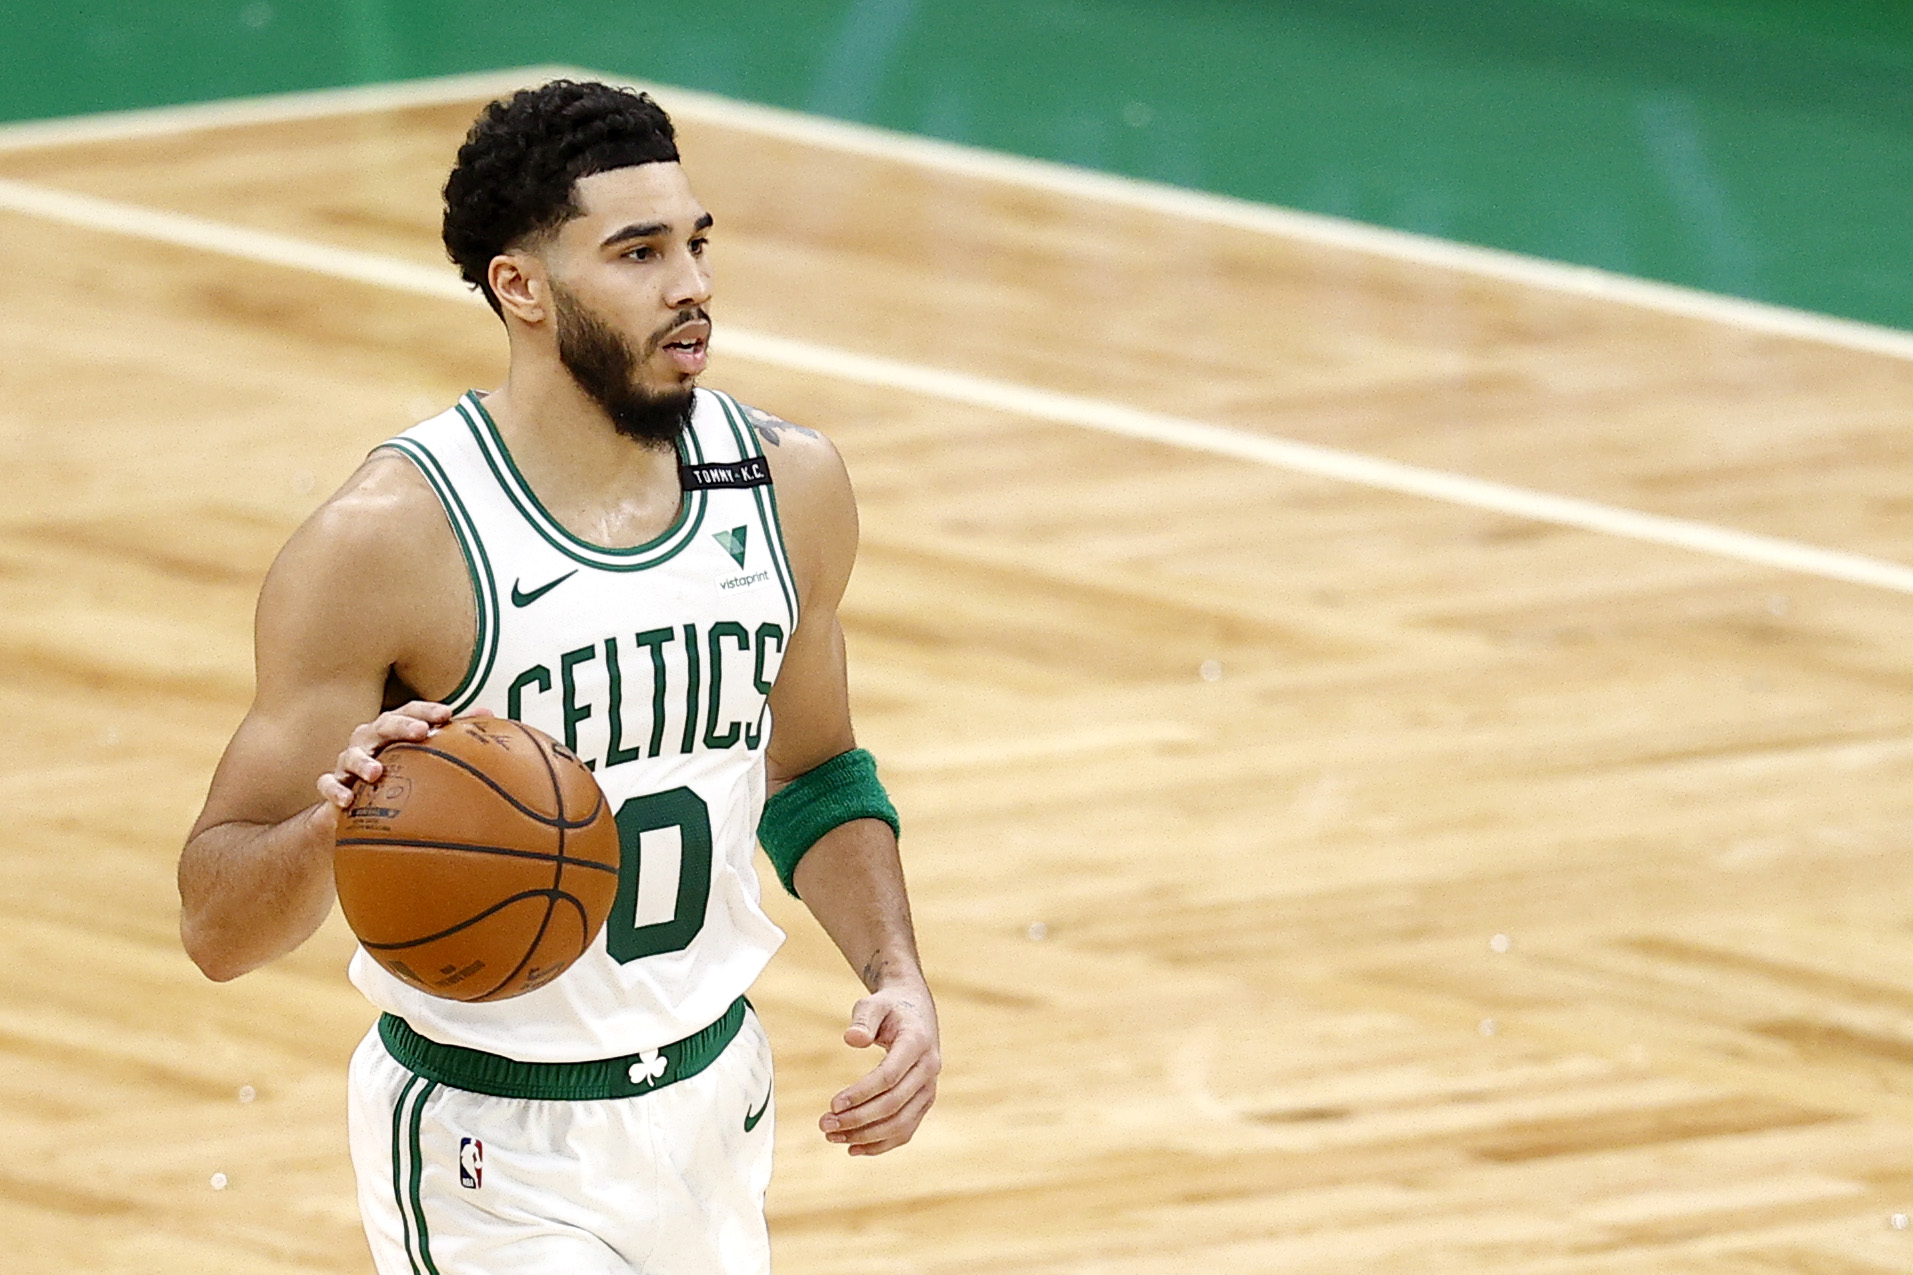 ‘I’m open to all ideas.’ How young Celtics star Jayson Tatum is growing